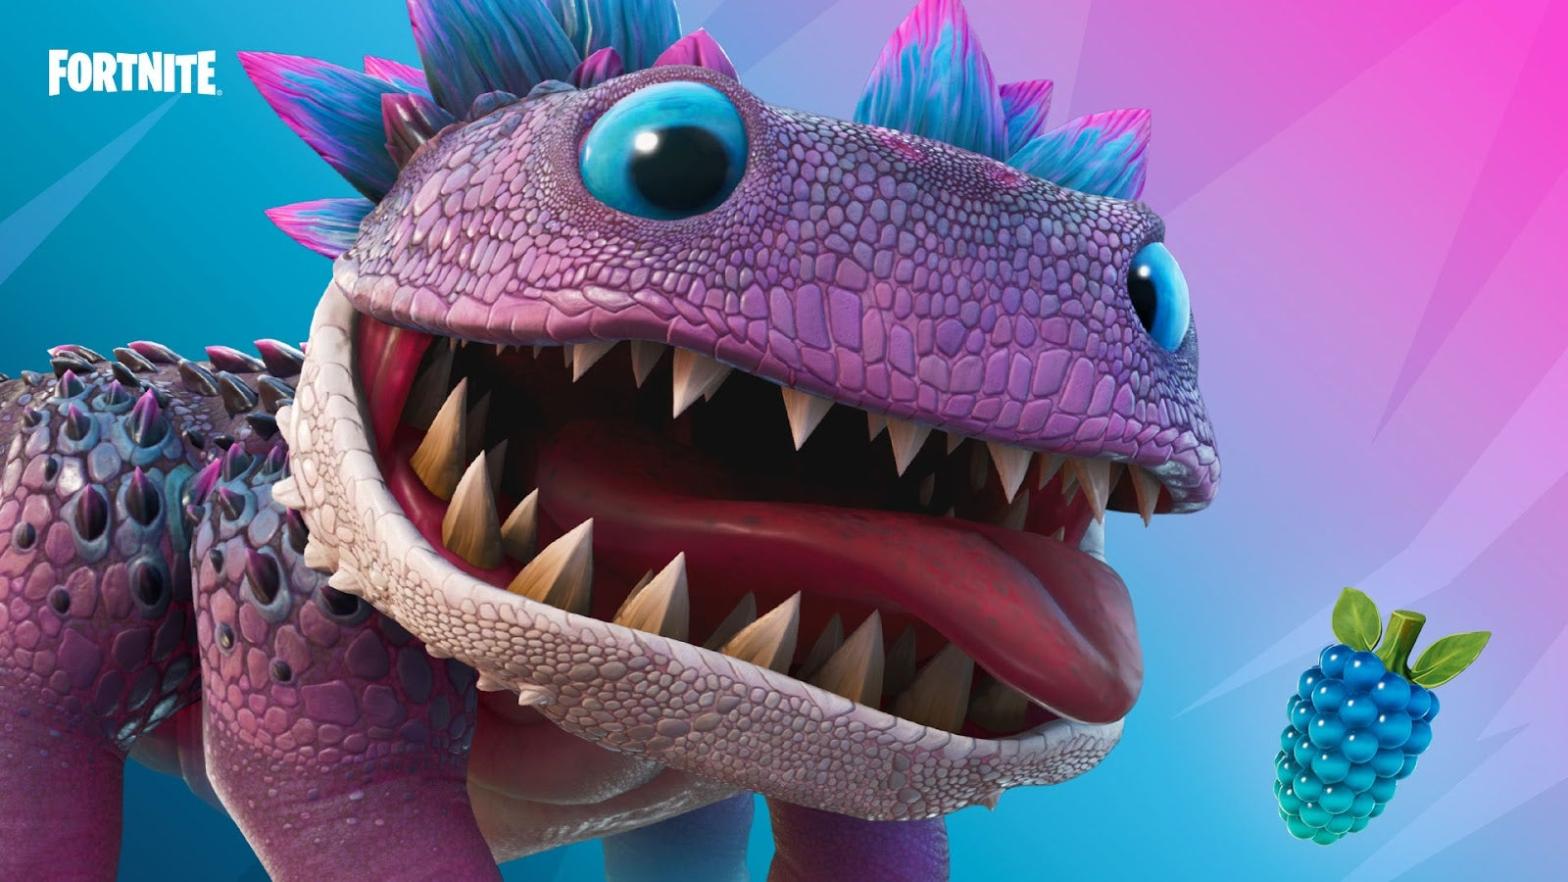 Whose a good dino-roar? You are!  (Image: Epic Games)